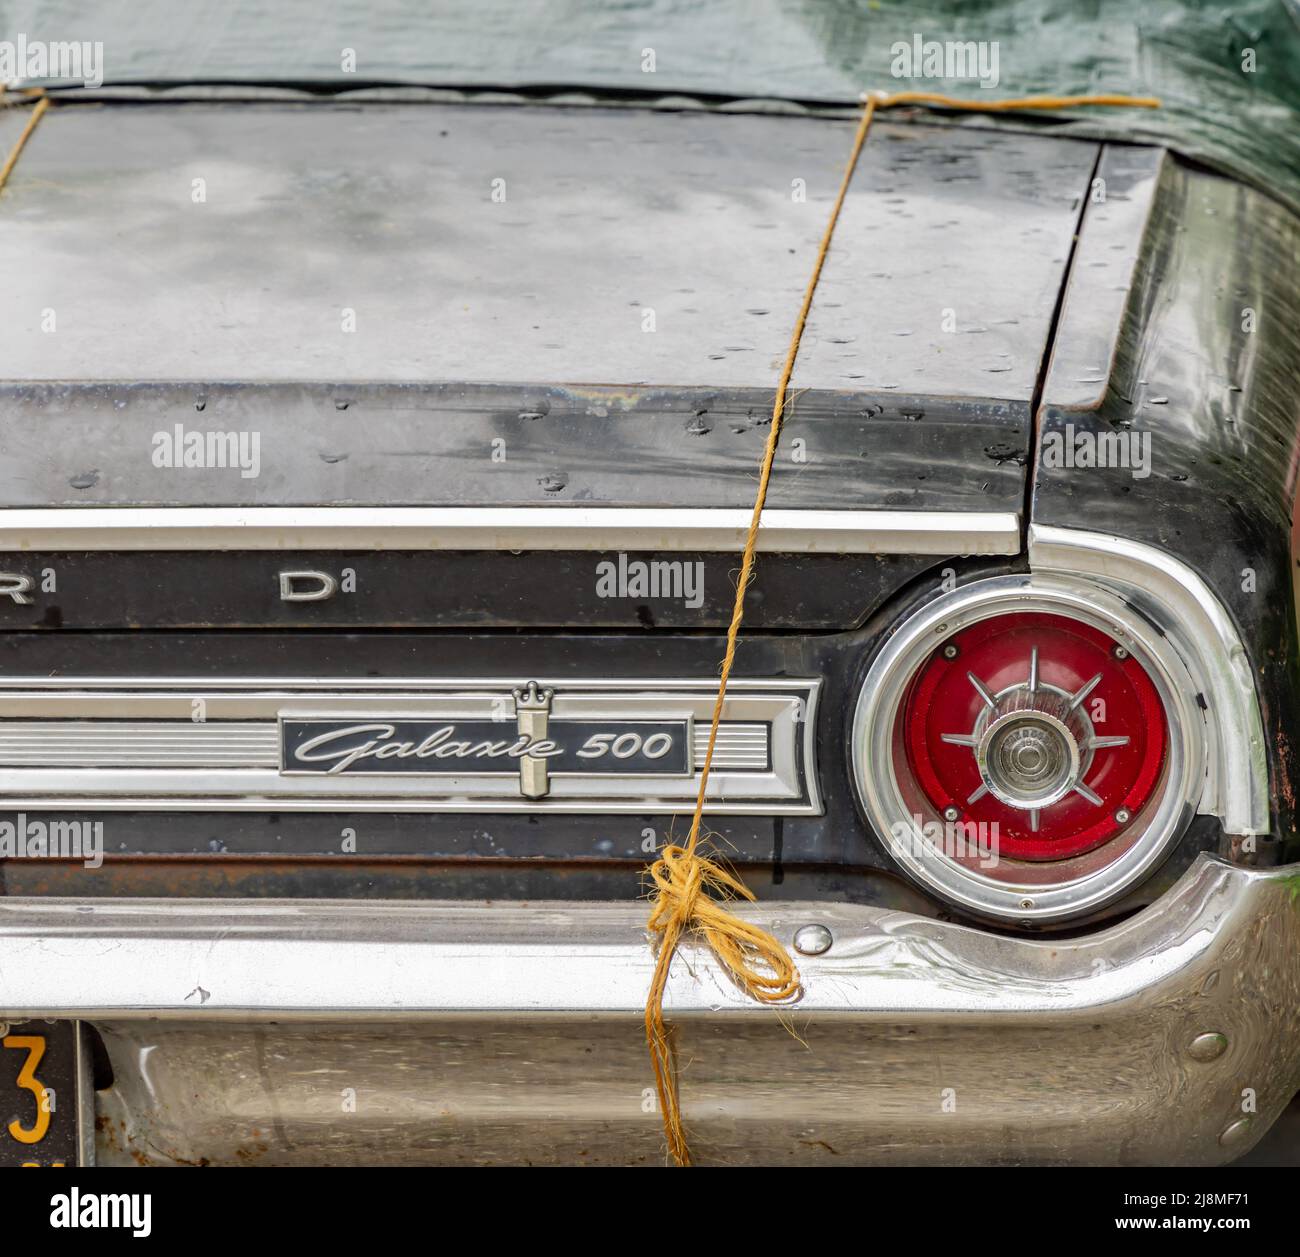 Detail image of a 1964 Ford Galaxie 500 Stock Photo